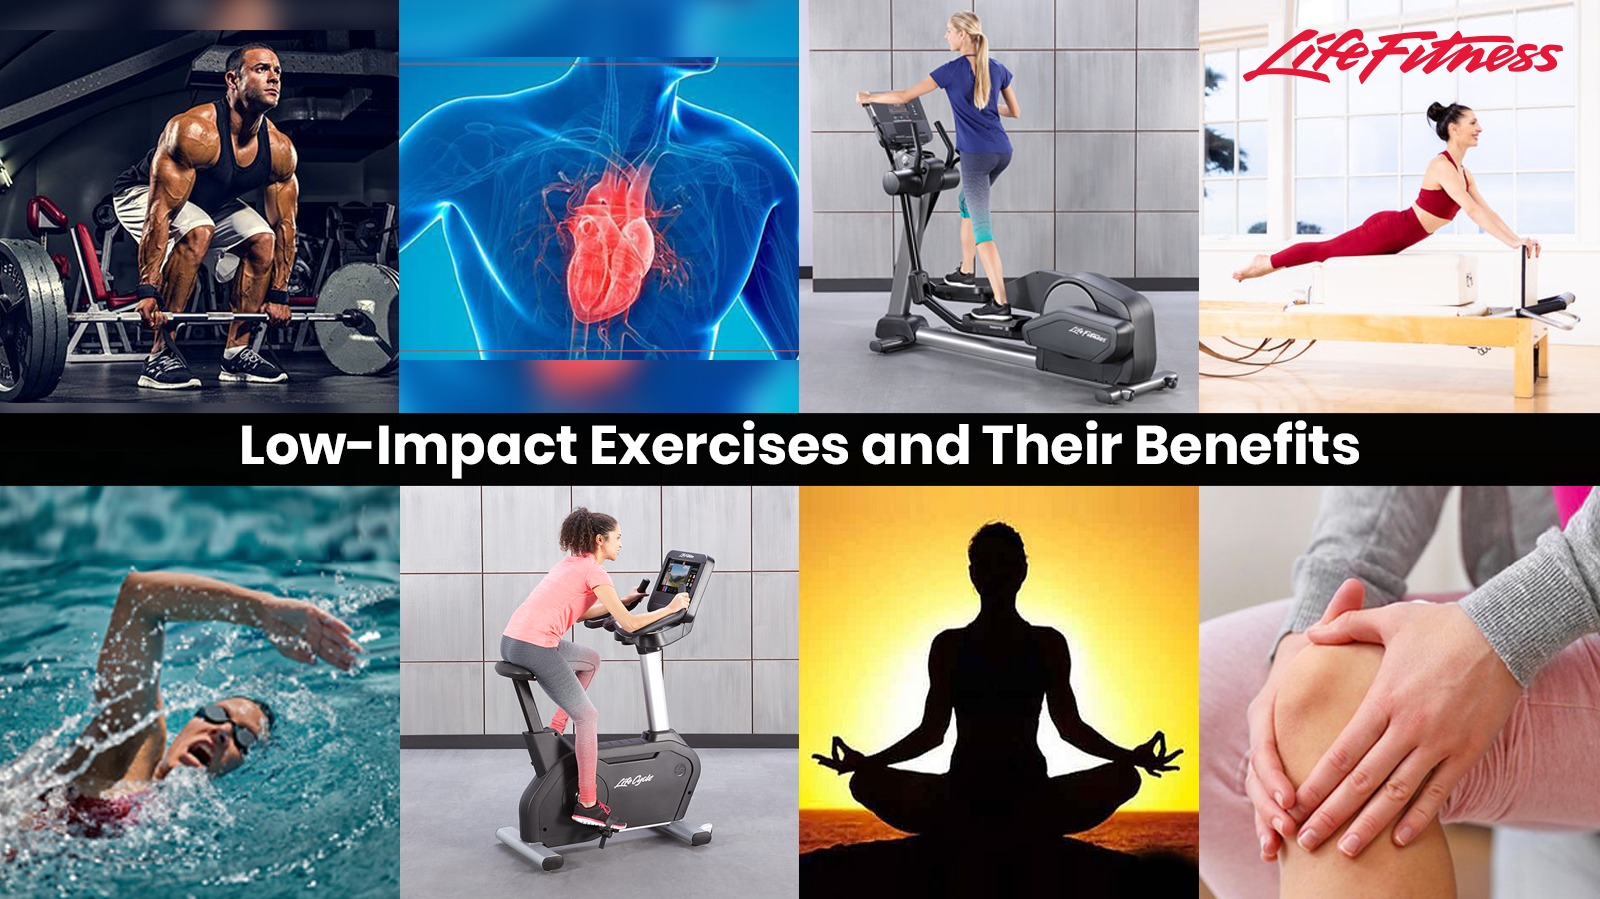 Low-Impact Exercises and Their Benefits